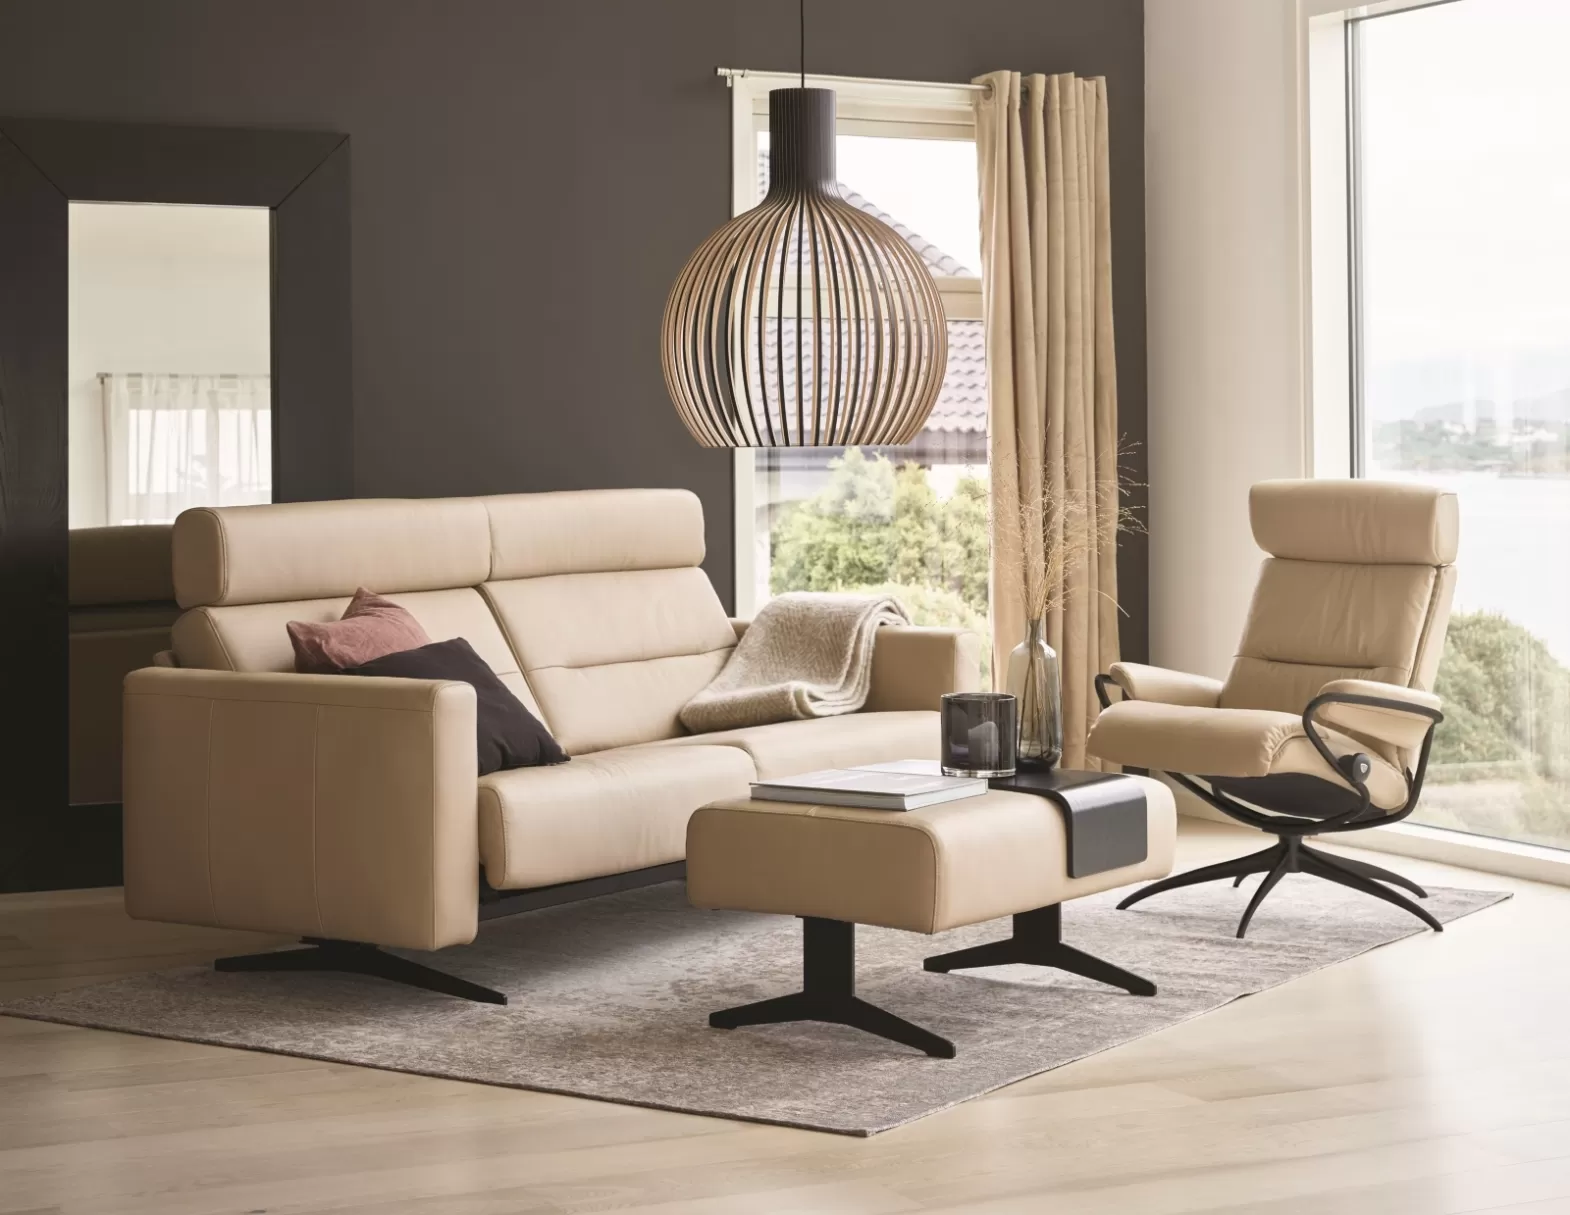 Step into a world of unmatched comfort with Stressless, now available at strikingly reduced prices in our special clearance section at Roomes. Recognized for its innovative design and unparalleled ergonomic comfort, Stressless furniture embodies the pinnacle of relaxation. Whether it's their renowned recliners or sumptuous sofas, our Stressless clearance range presents the chance to own these luxurious pieces at irresistible discounts. Here's your moment to enjoy the premium relaxation that Stressless offers, all while making savvy savings.
